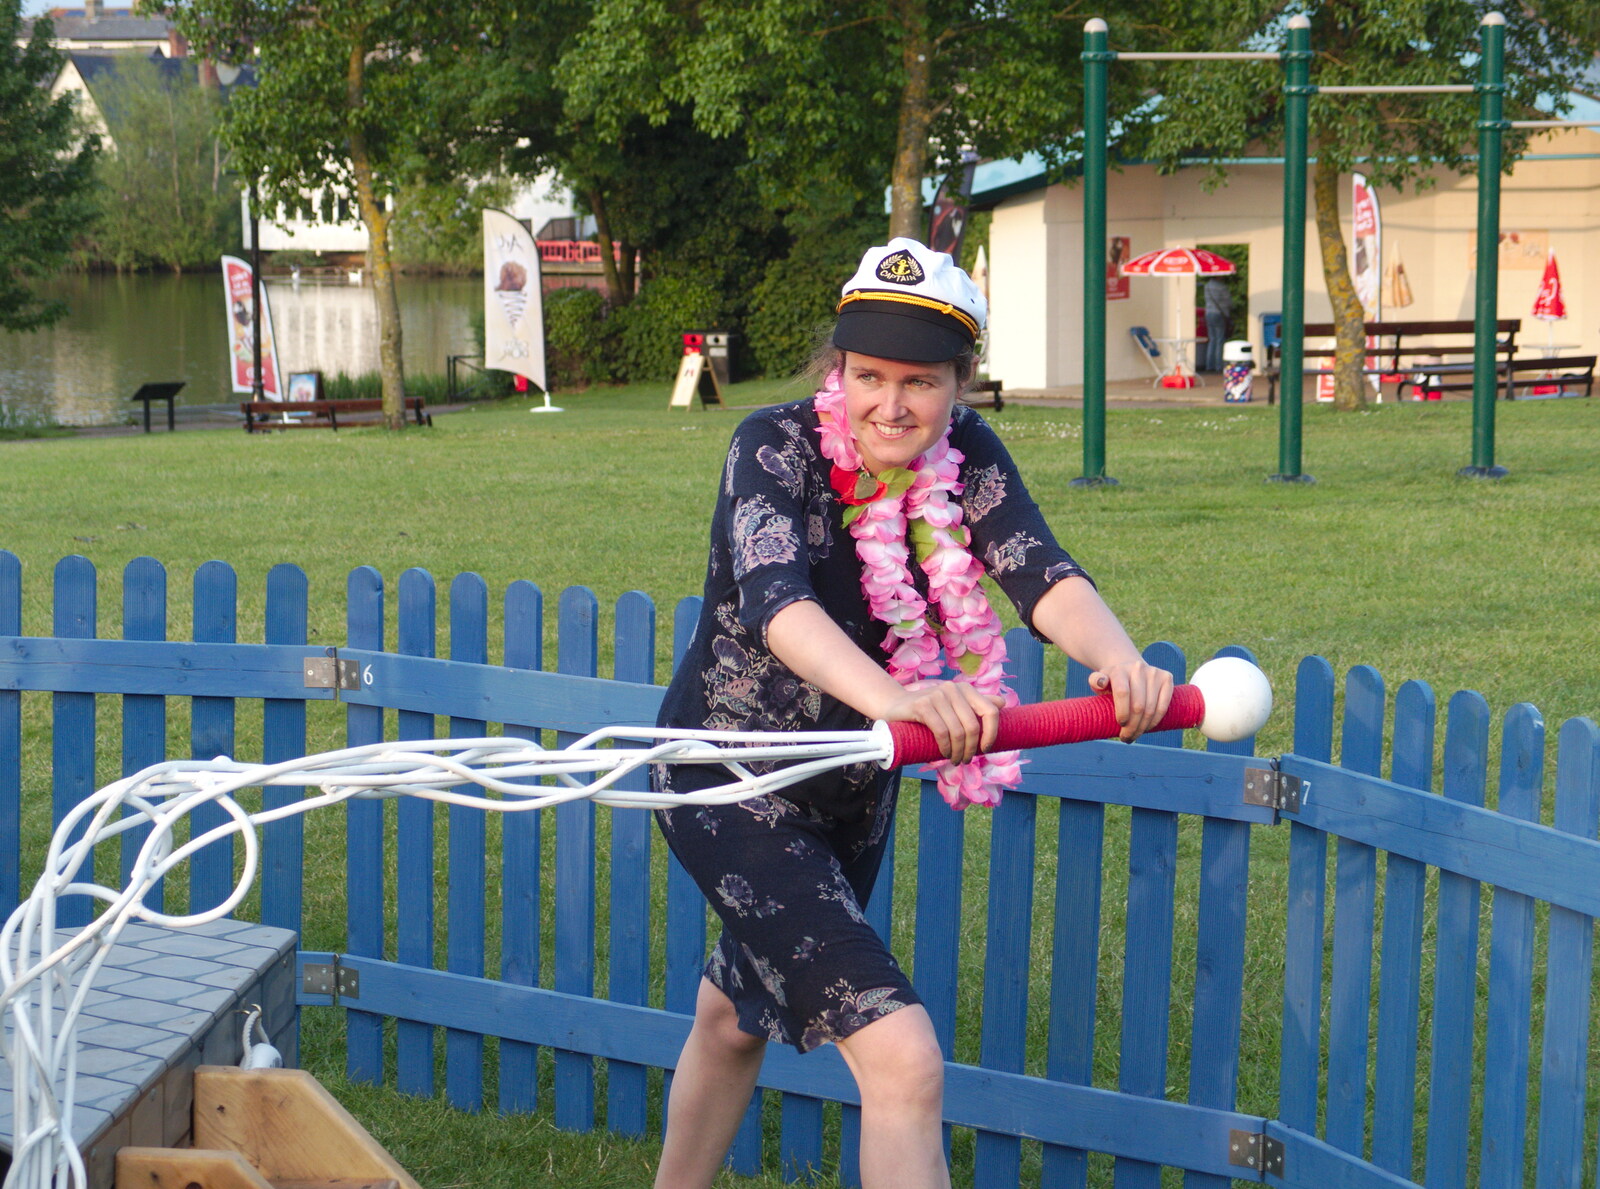 Isobel has a go at pushing from A Family Fun Day on the Park, Diss, Norfolk - 16th May 2014